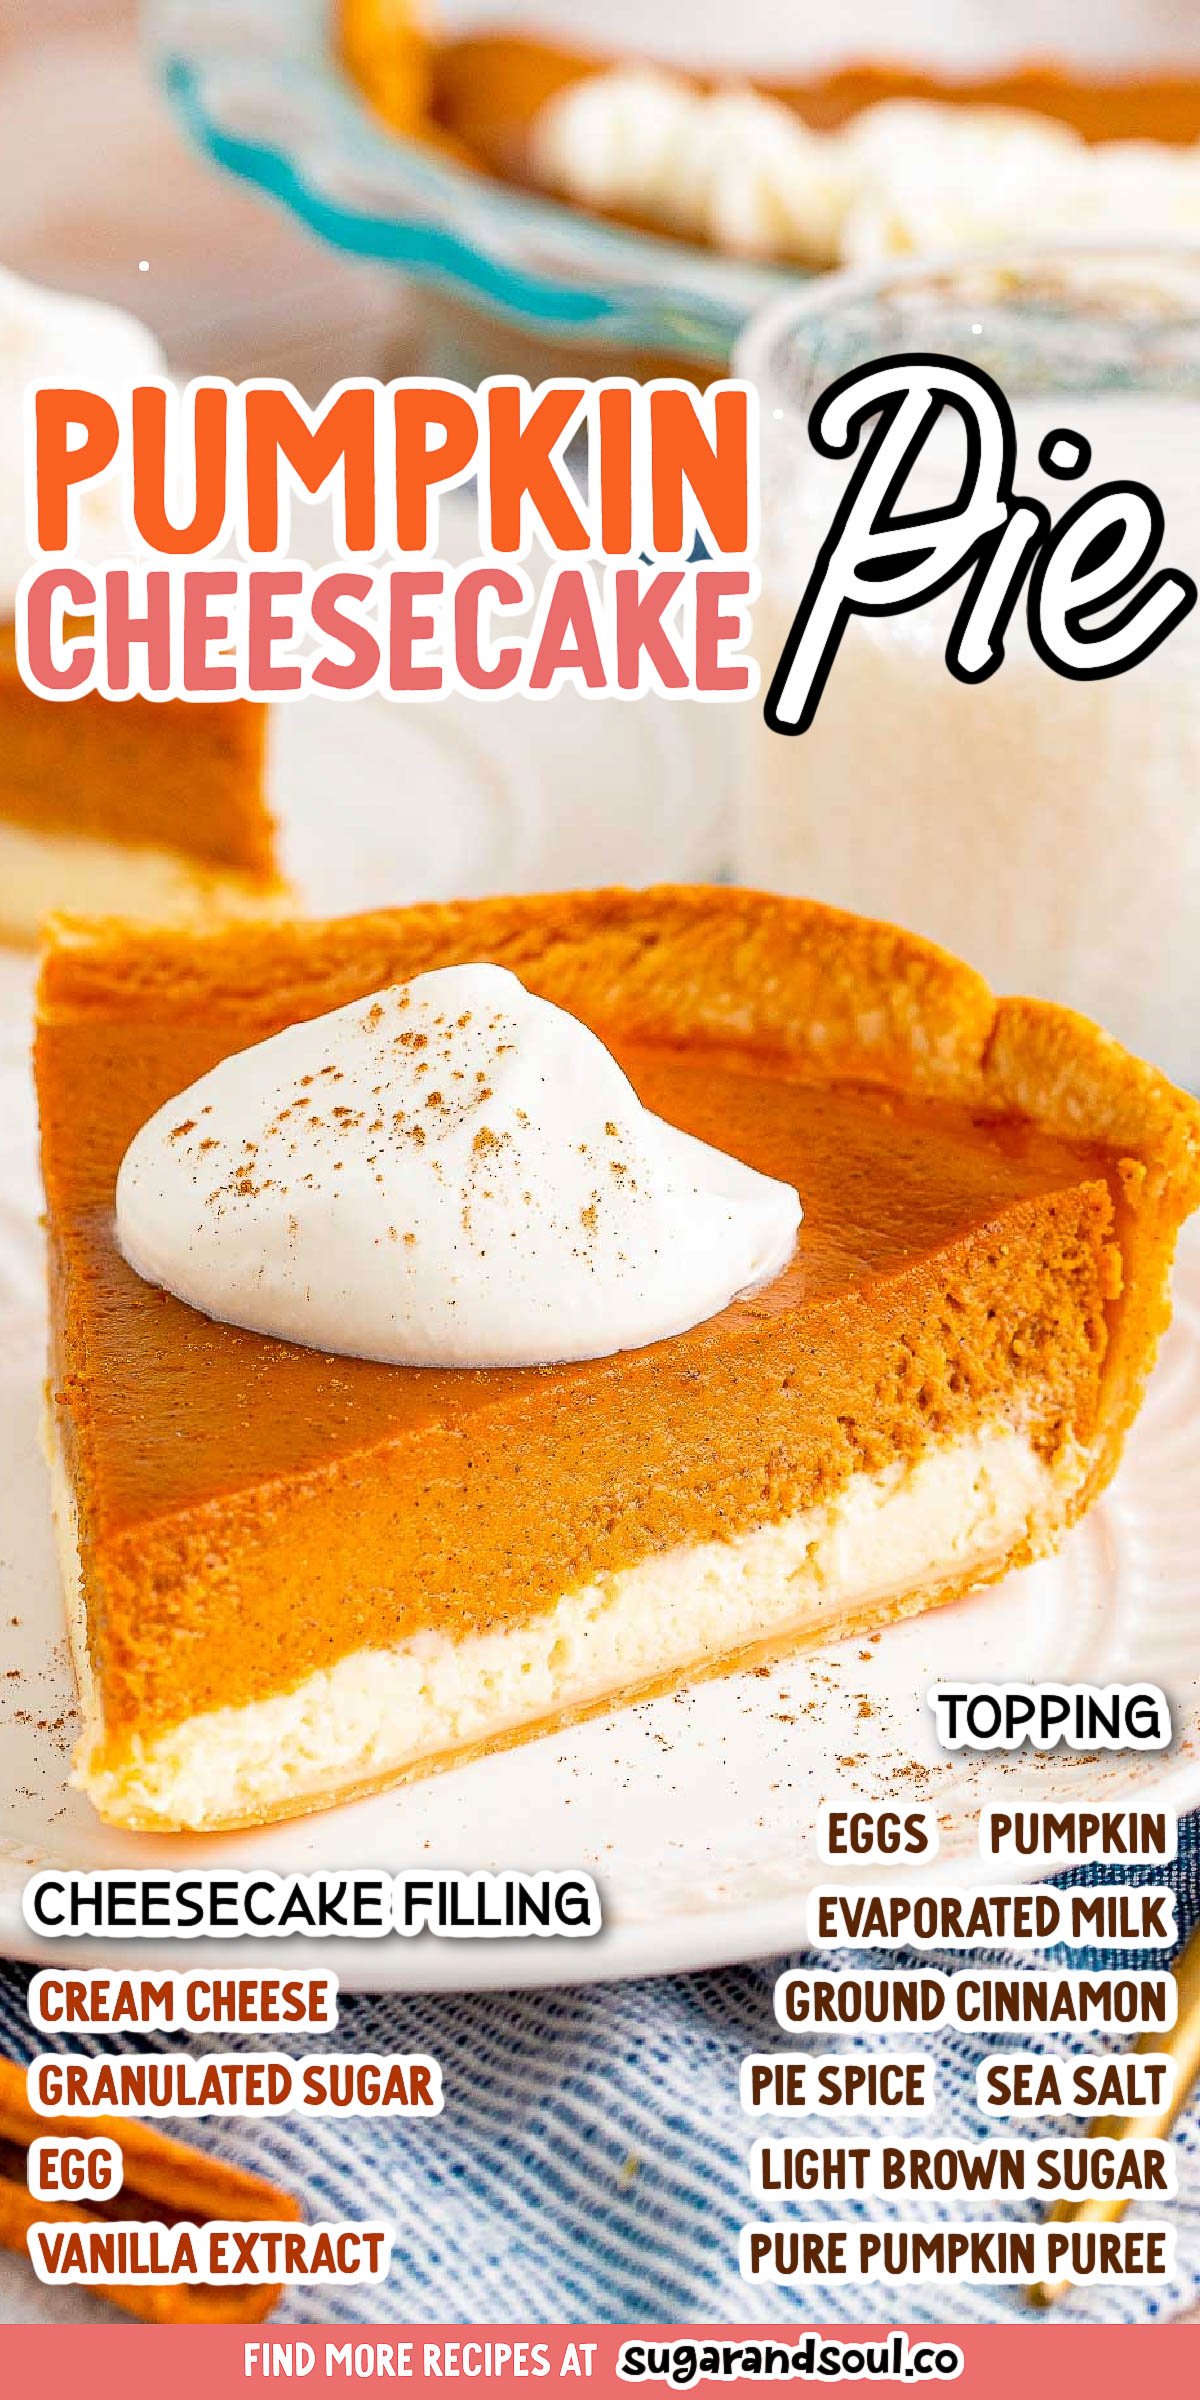 Pumpkin Cheesecake Pie combines a flaky pie crust with layers of creamy homemade cheesecake and pumpkin filling for the best seasonal treat! Prep this easy-to-make pie in only 20 minutes! via @sugarandsoulco